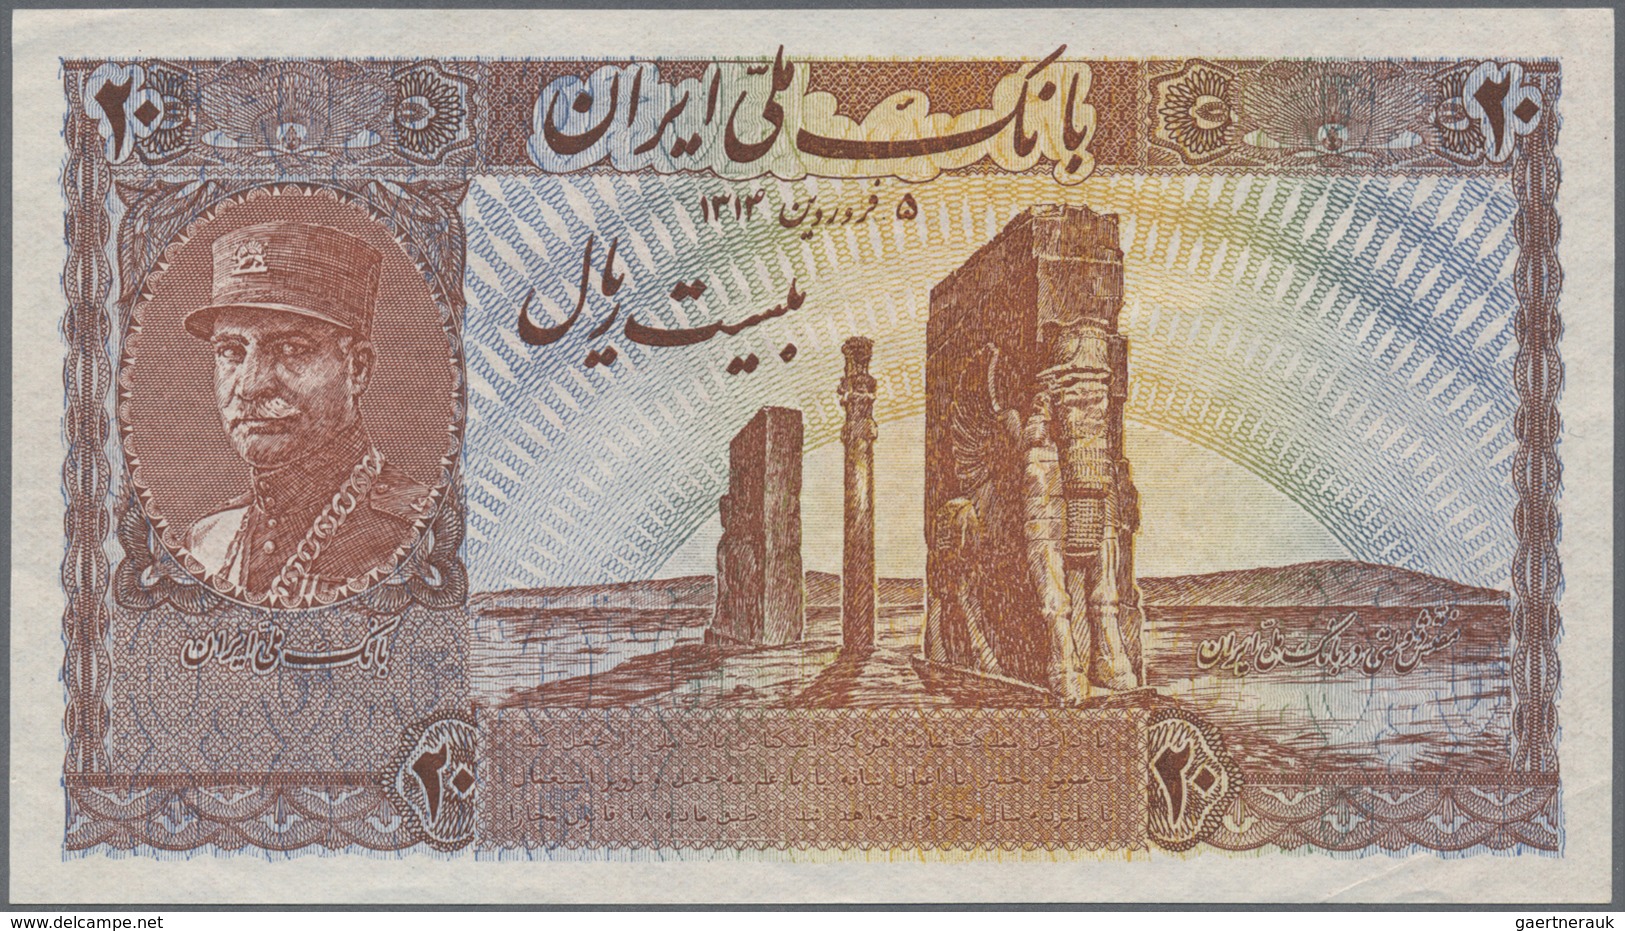 Iran: Highly Rare - Until Now Worldwide Unique - Proof Trial Print For A KINGFOM OF IRAN Under The B - Iran